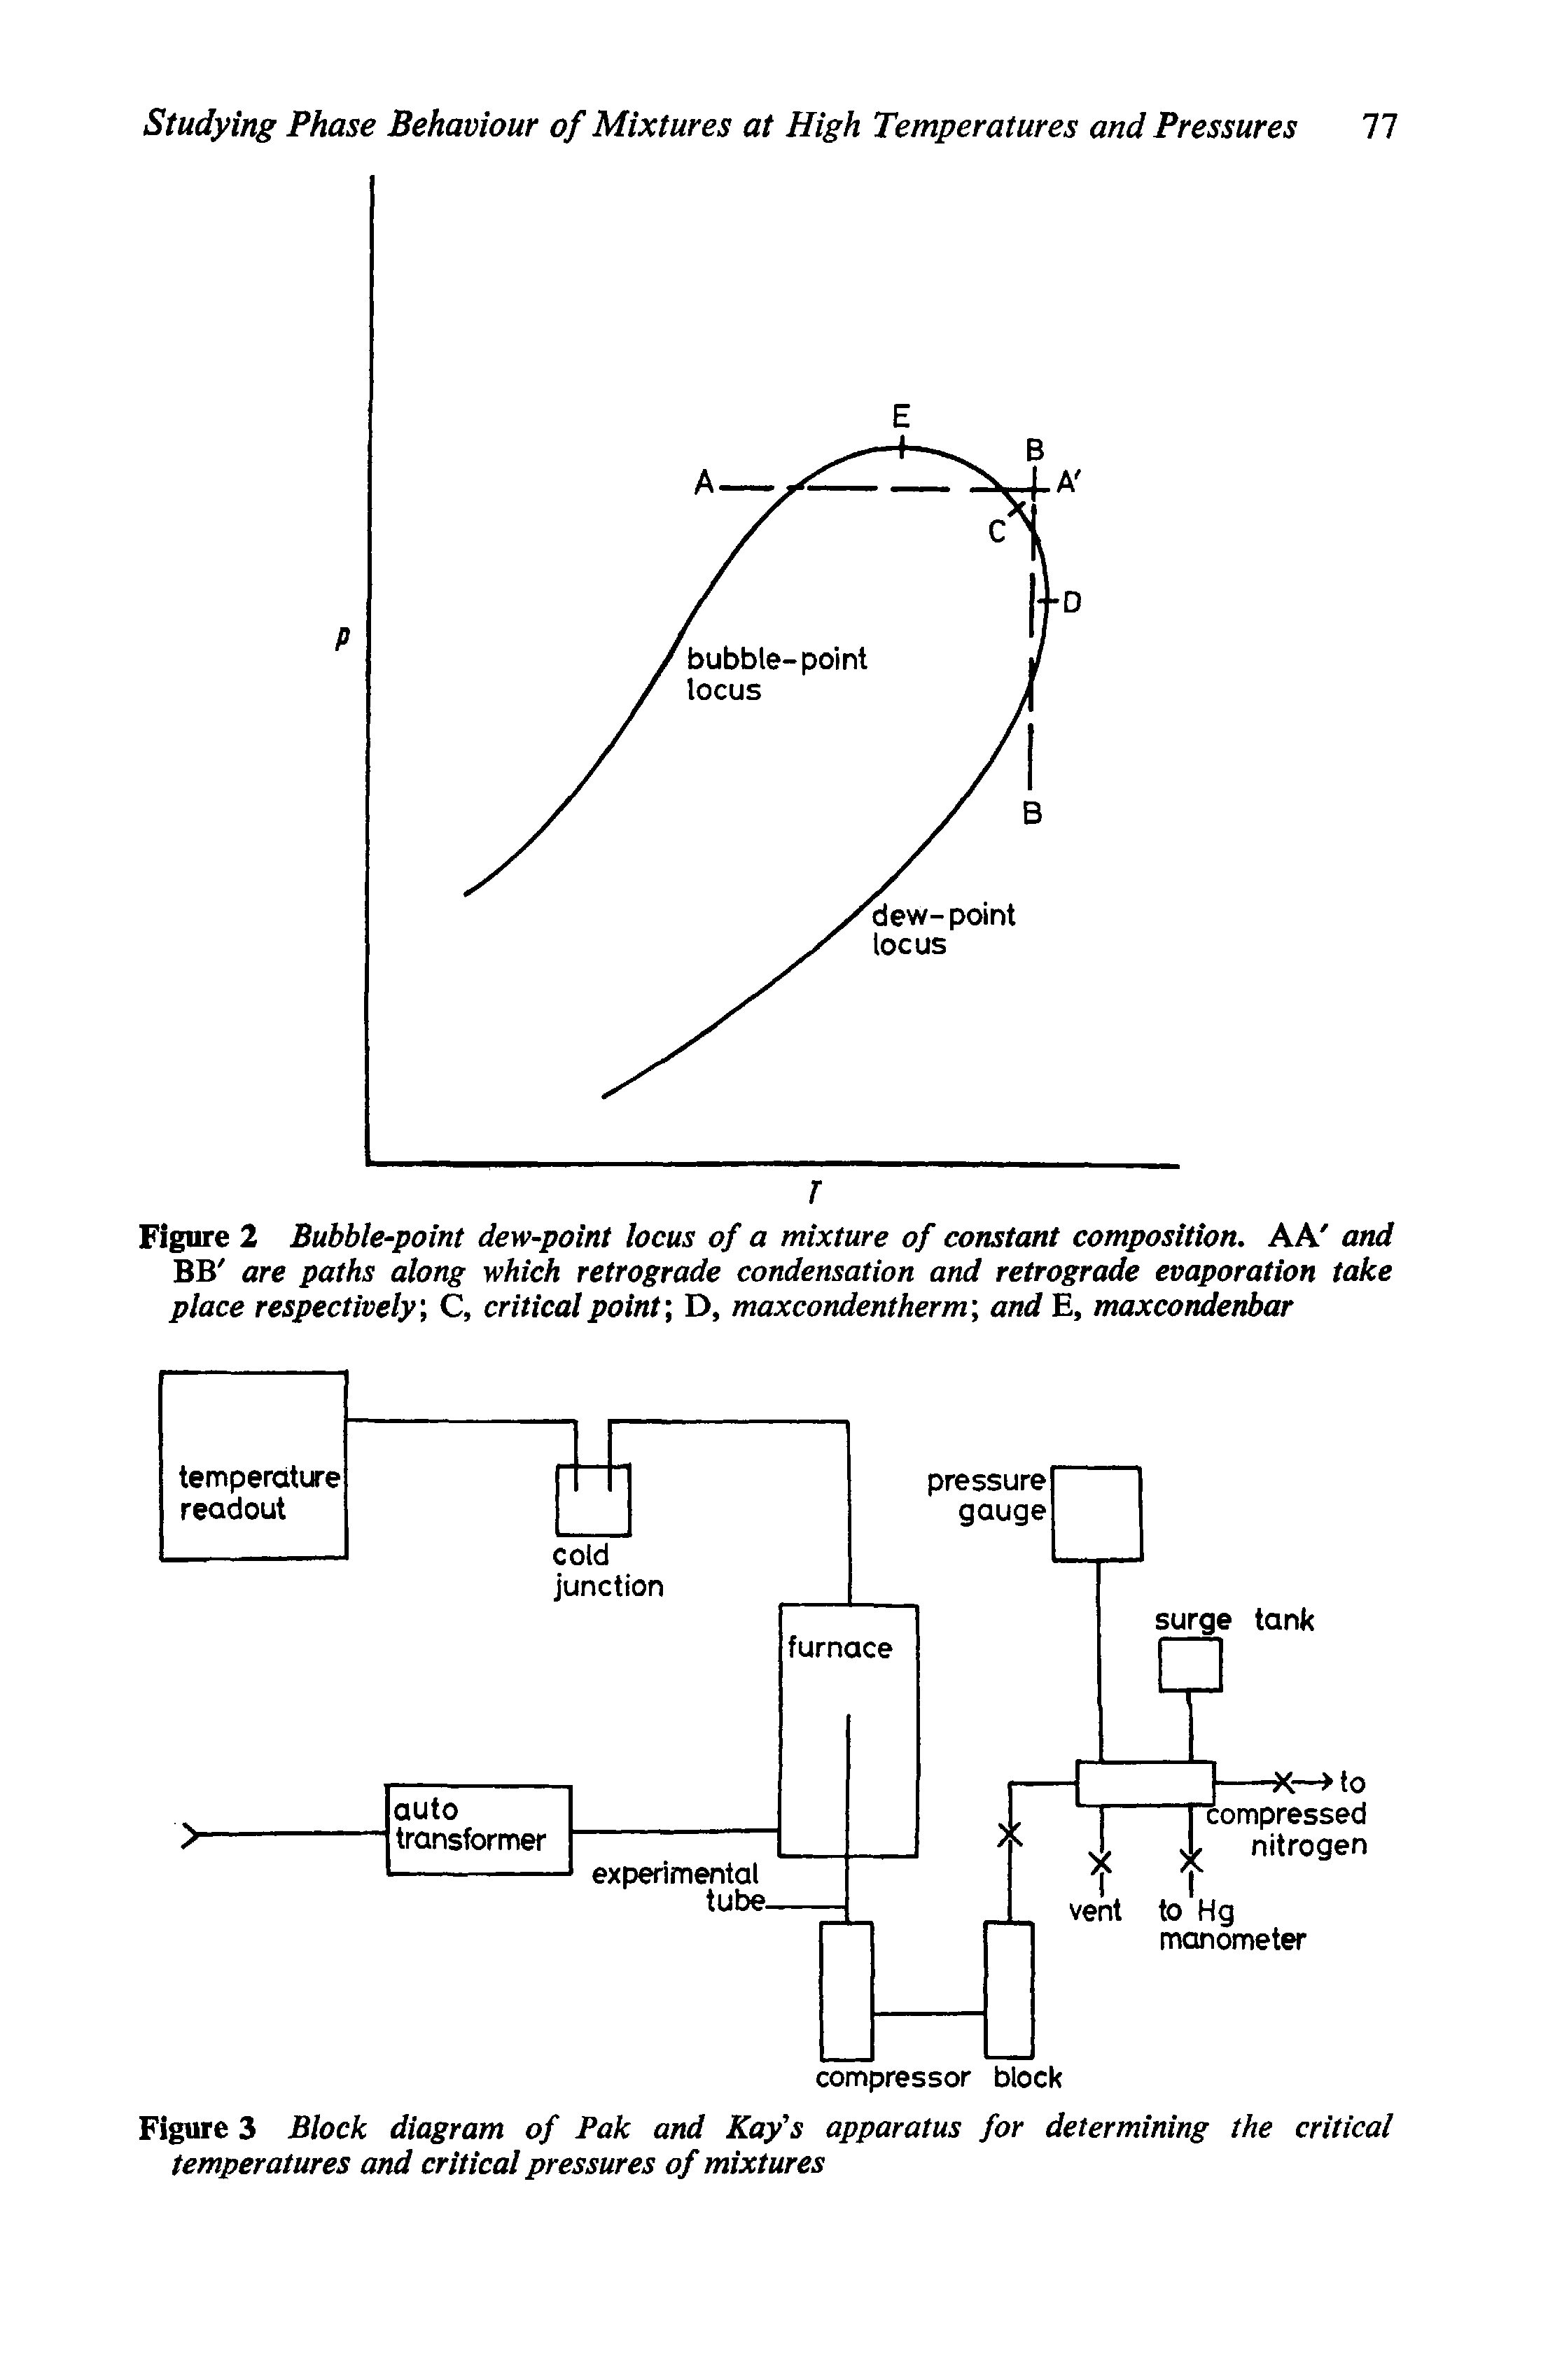 Figure 2 Bubble-point dew-point locus of a mixture of constant composition. AA and BB are paths along which retrograde condensation and retrograde evaporation take place respectively, C, critical point, D, maxcondentherm-, andE, maxcondenbar...